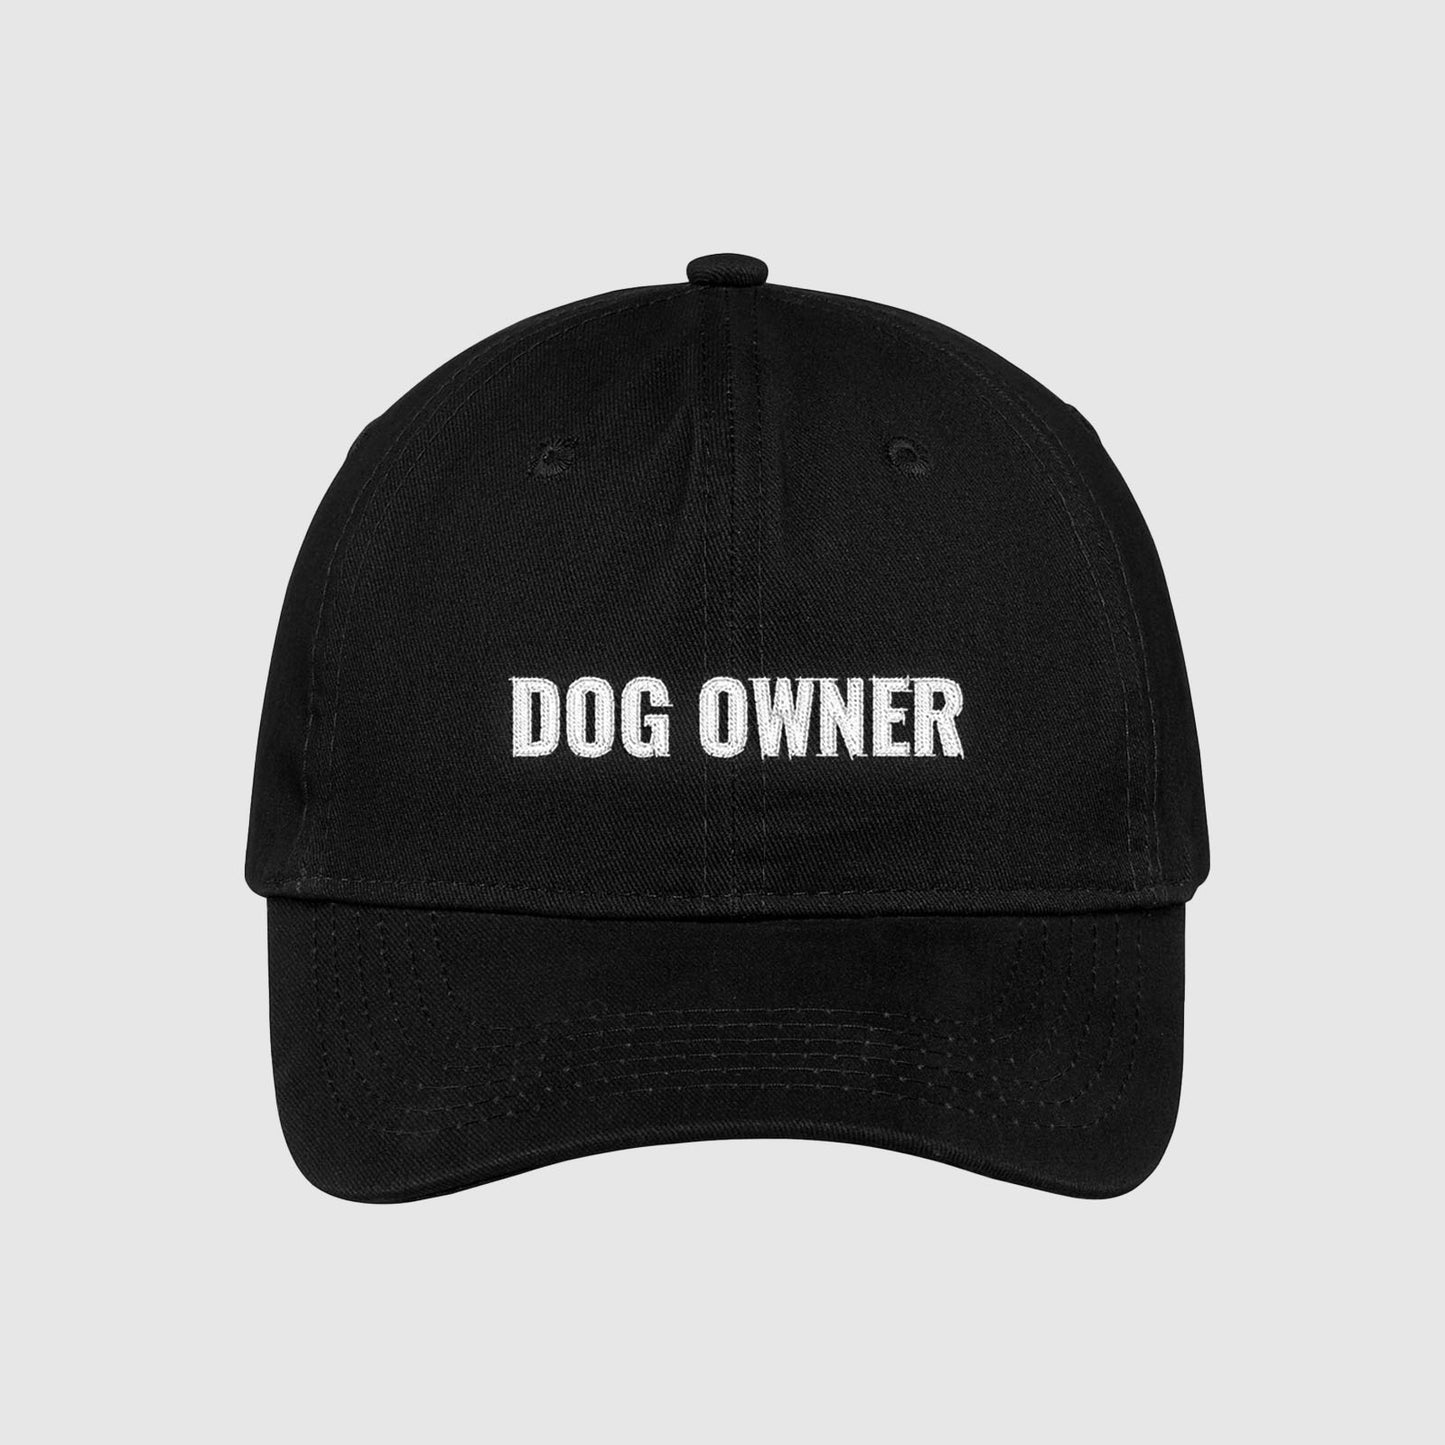 Black dad hat with Dog Owner embroidered on the front with white thread.